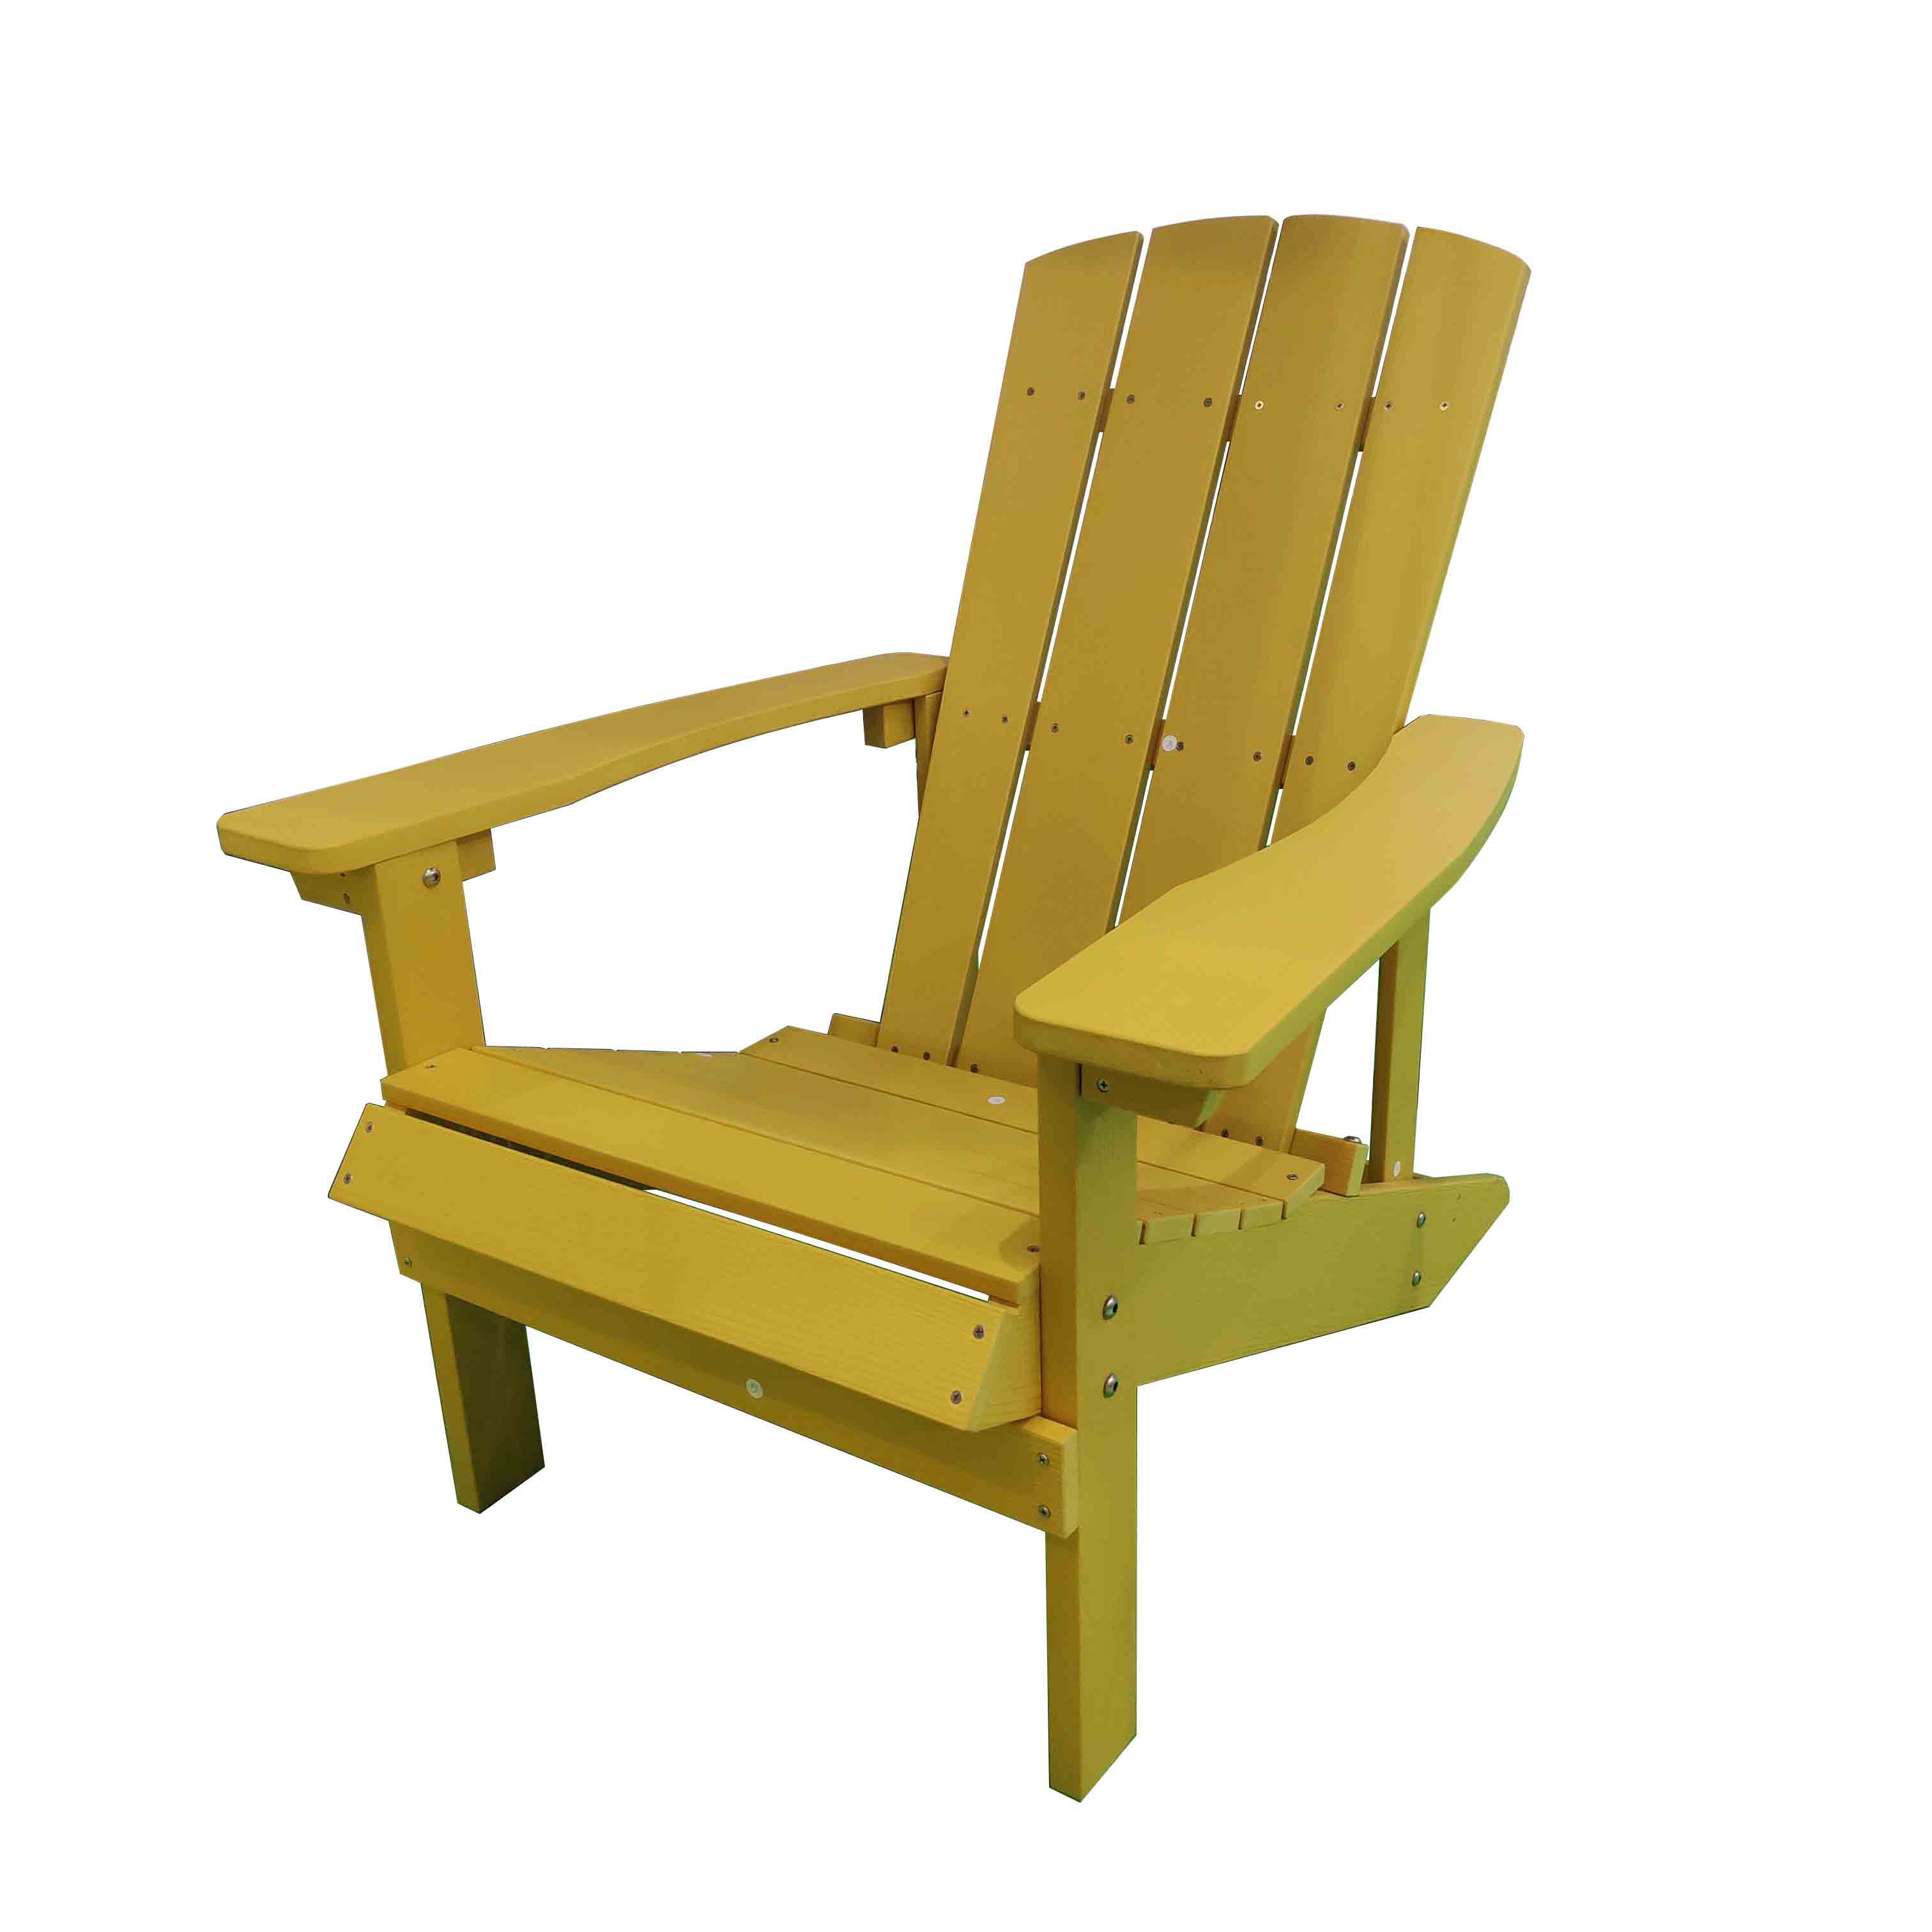 Factory wholesale Rattan Outdoor Chair - JJ-C14501-YLW-GG PS wood Adirondack chair – Jin-jiang Industry